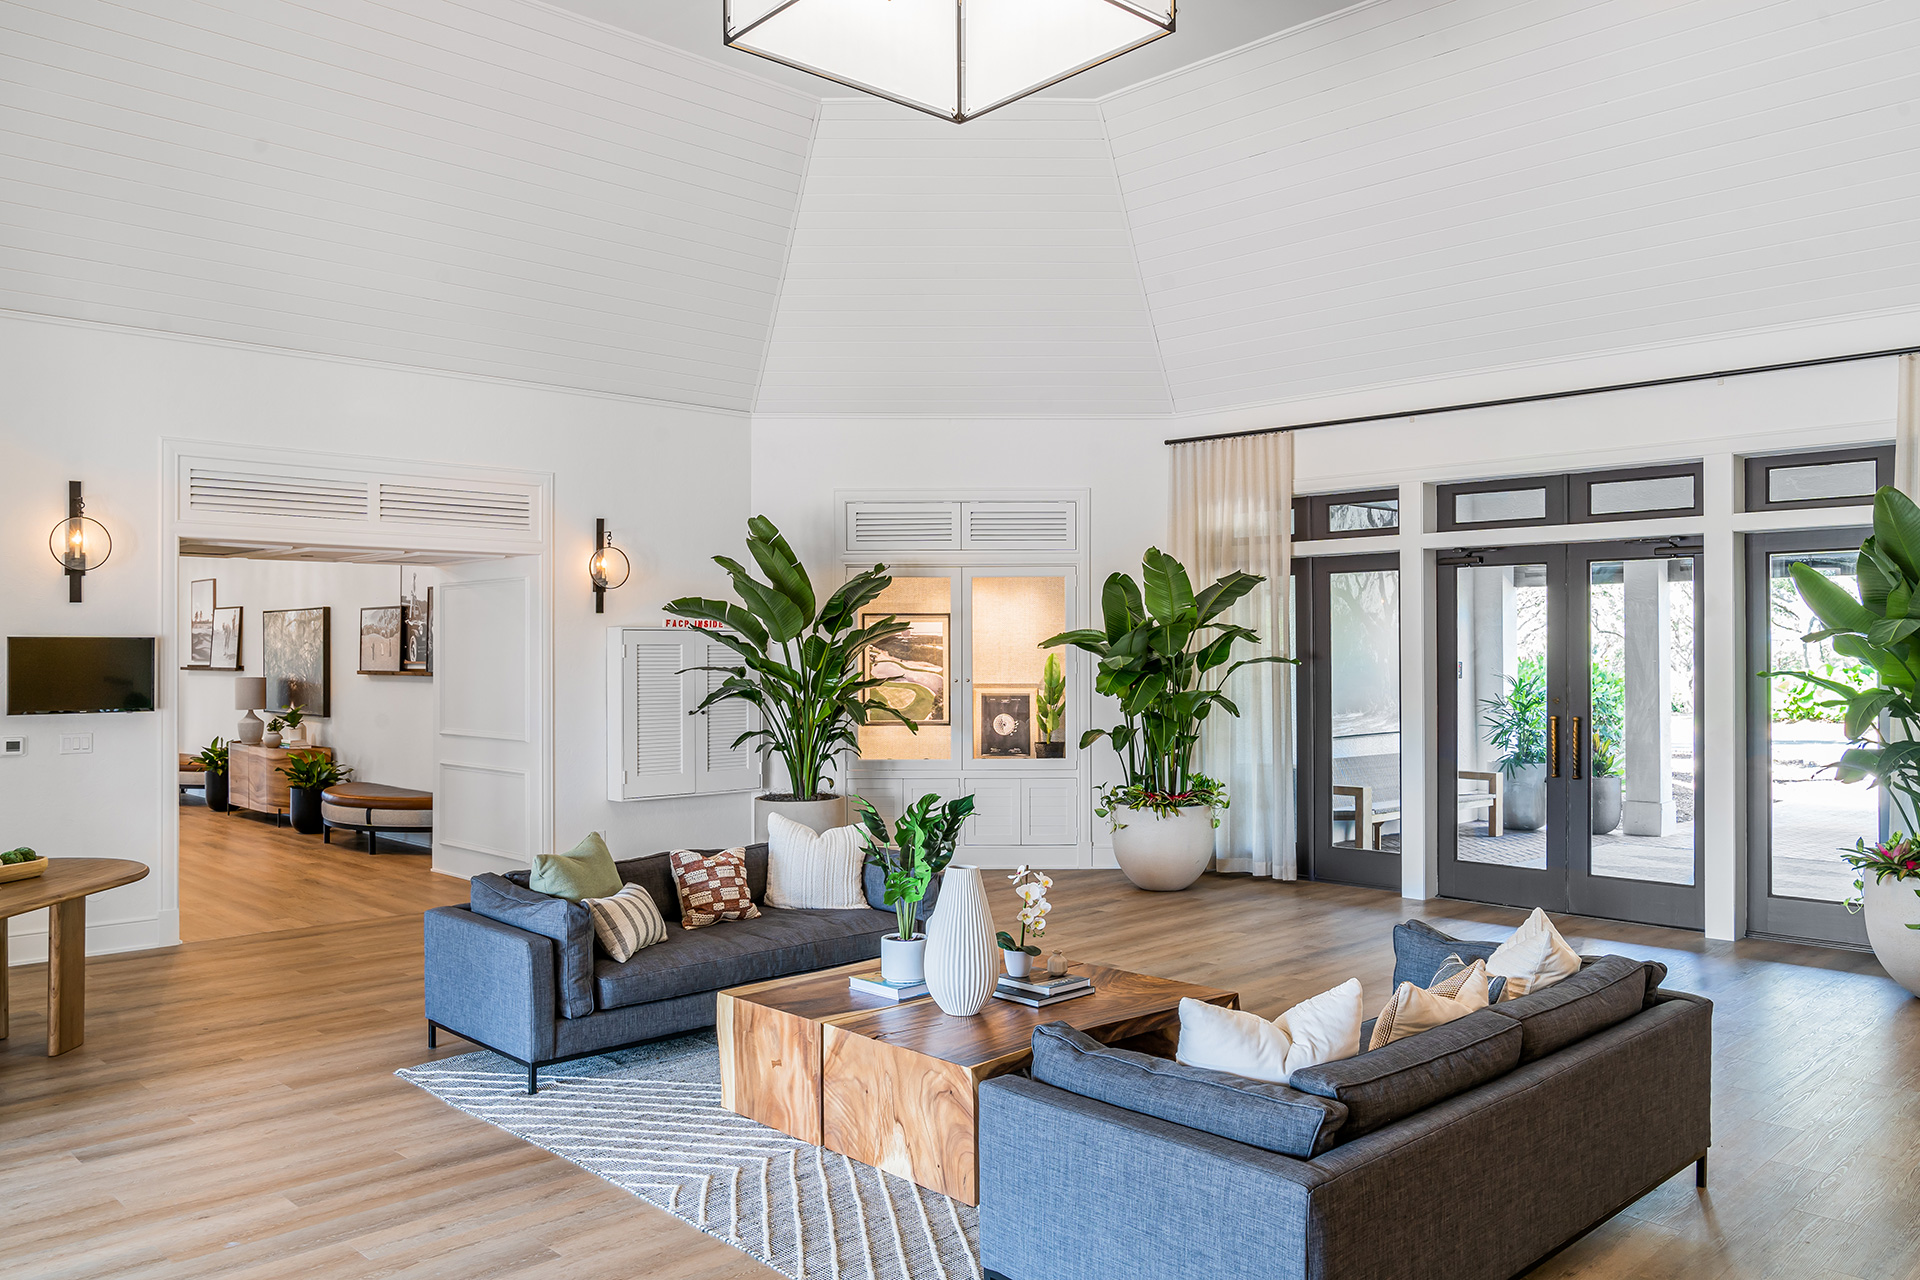 A living room with large windows overlooking the Saltleaf Golf Preserve, showcasing the beautiful championship golf course in Bonita Springs.